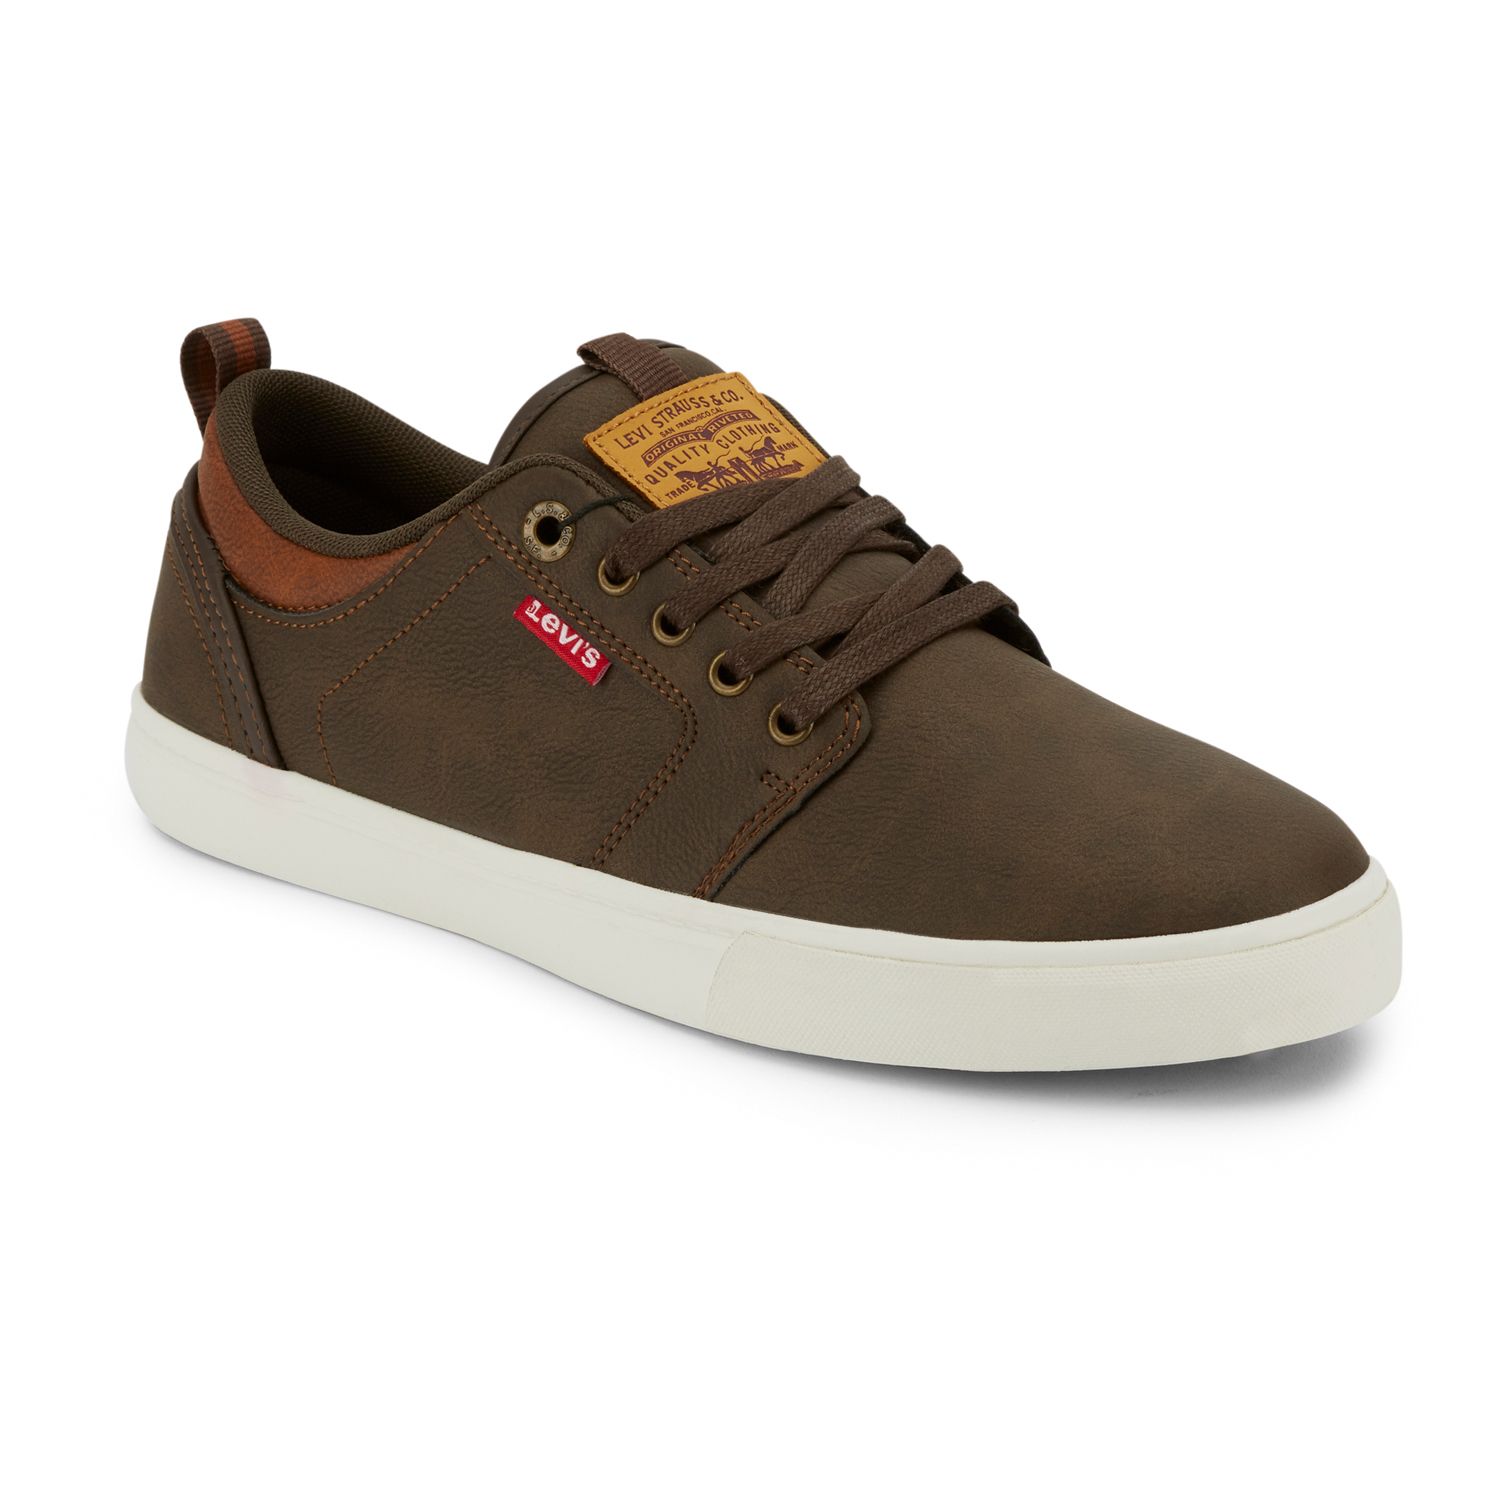 Image for Levi's Alpine Waxed Men's Sneakers at Kohl's.